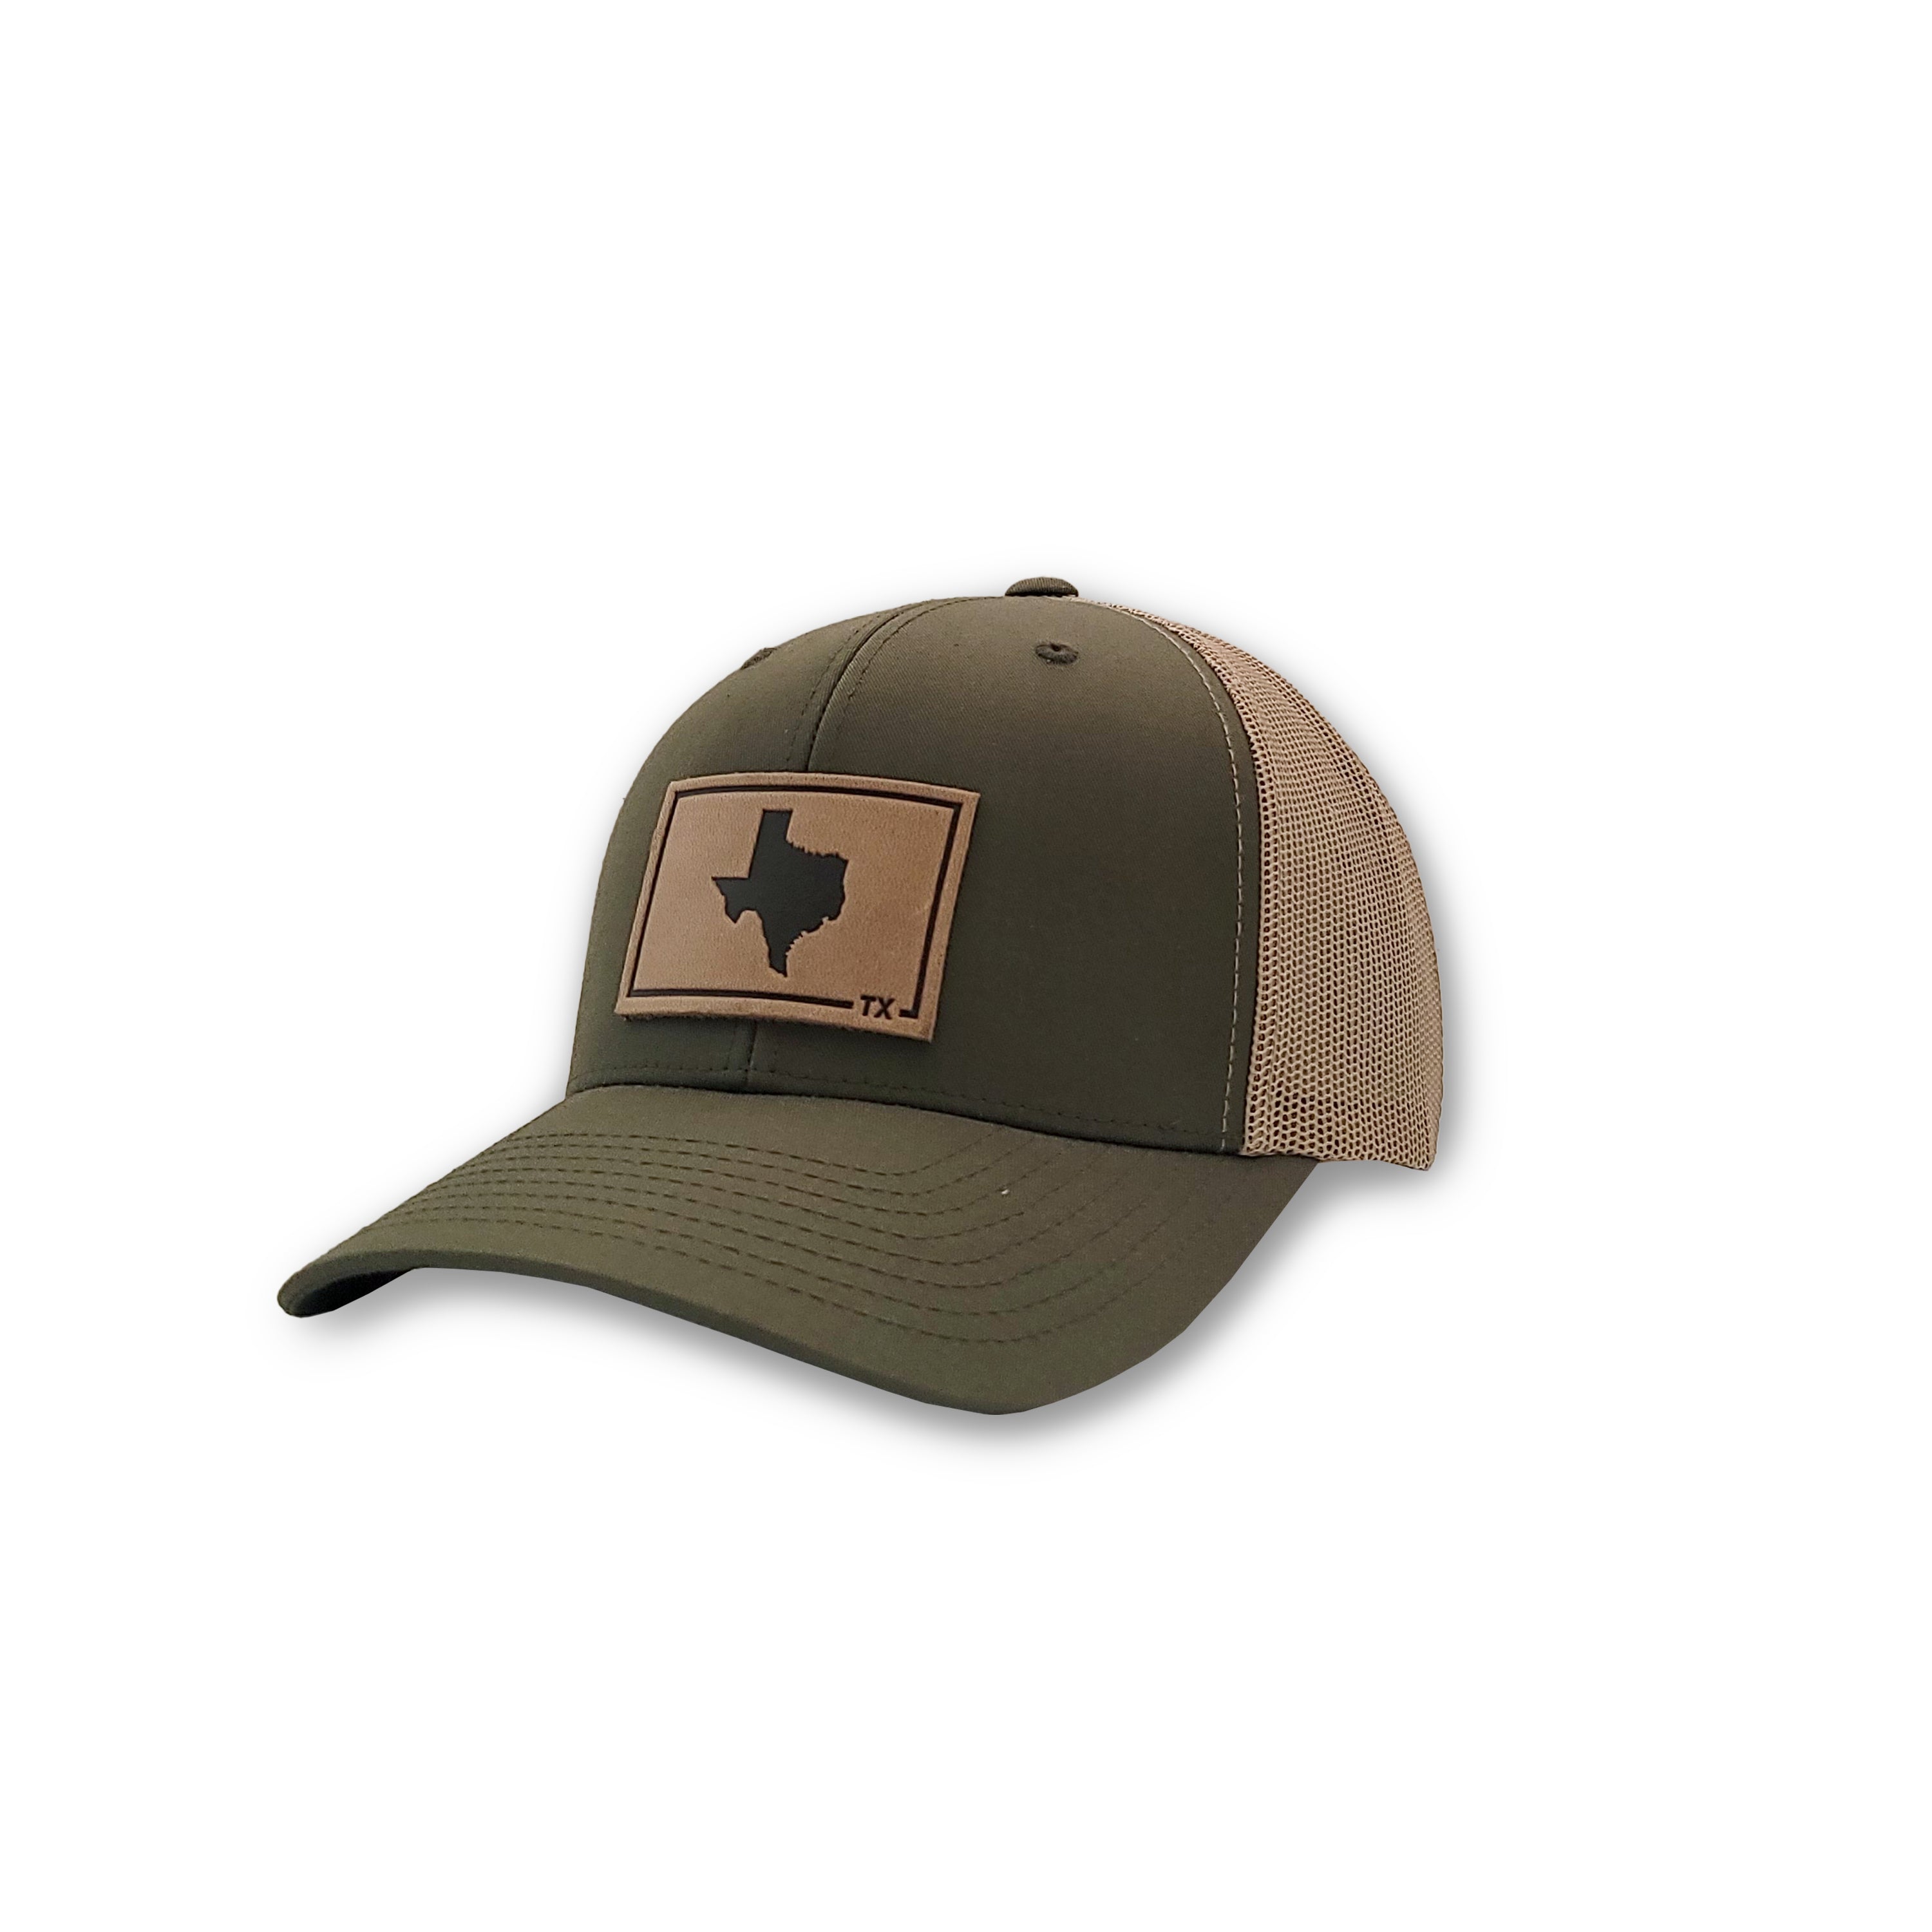 State of Texas Range Leather Patch Cap